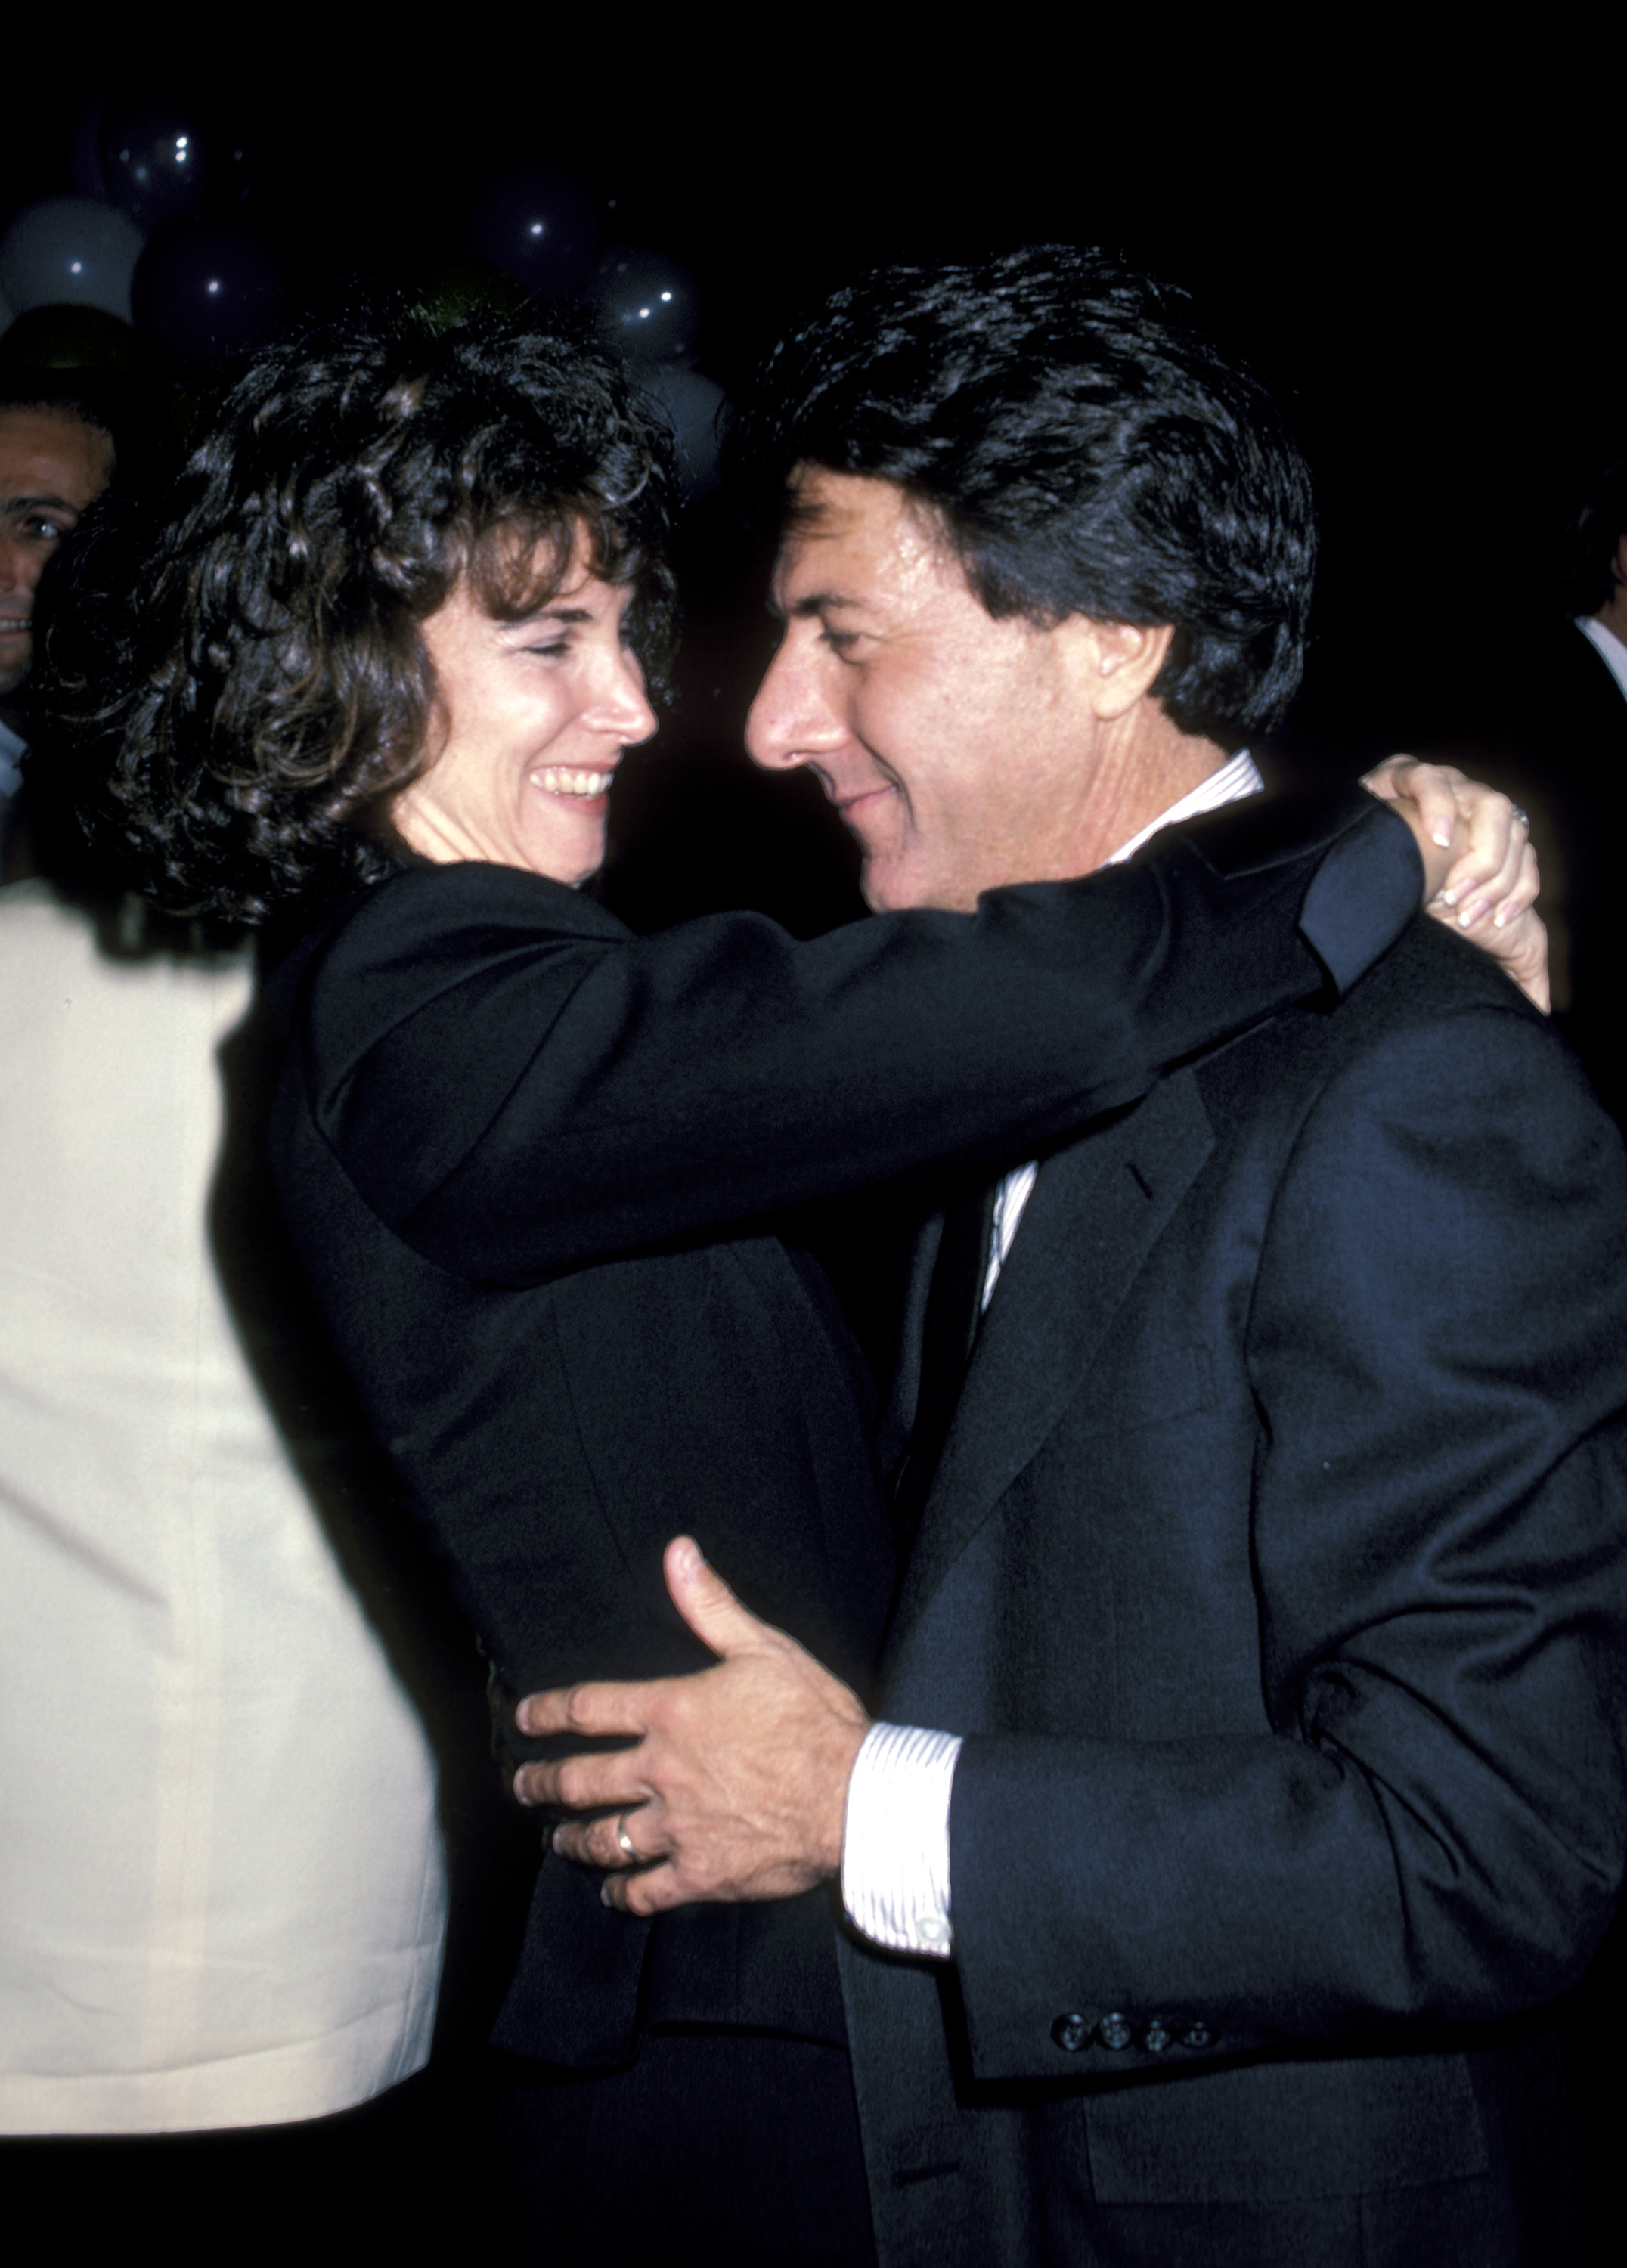 The woman and the actor during Smile Party in New York City on November 24, 1986. | Source: Getty Images